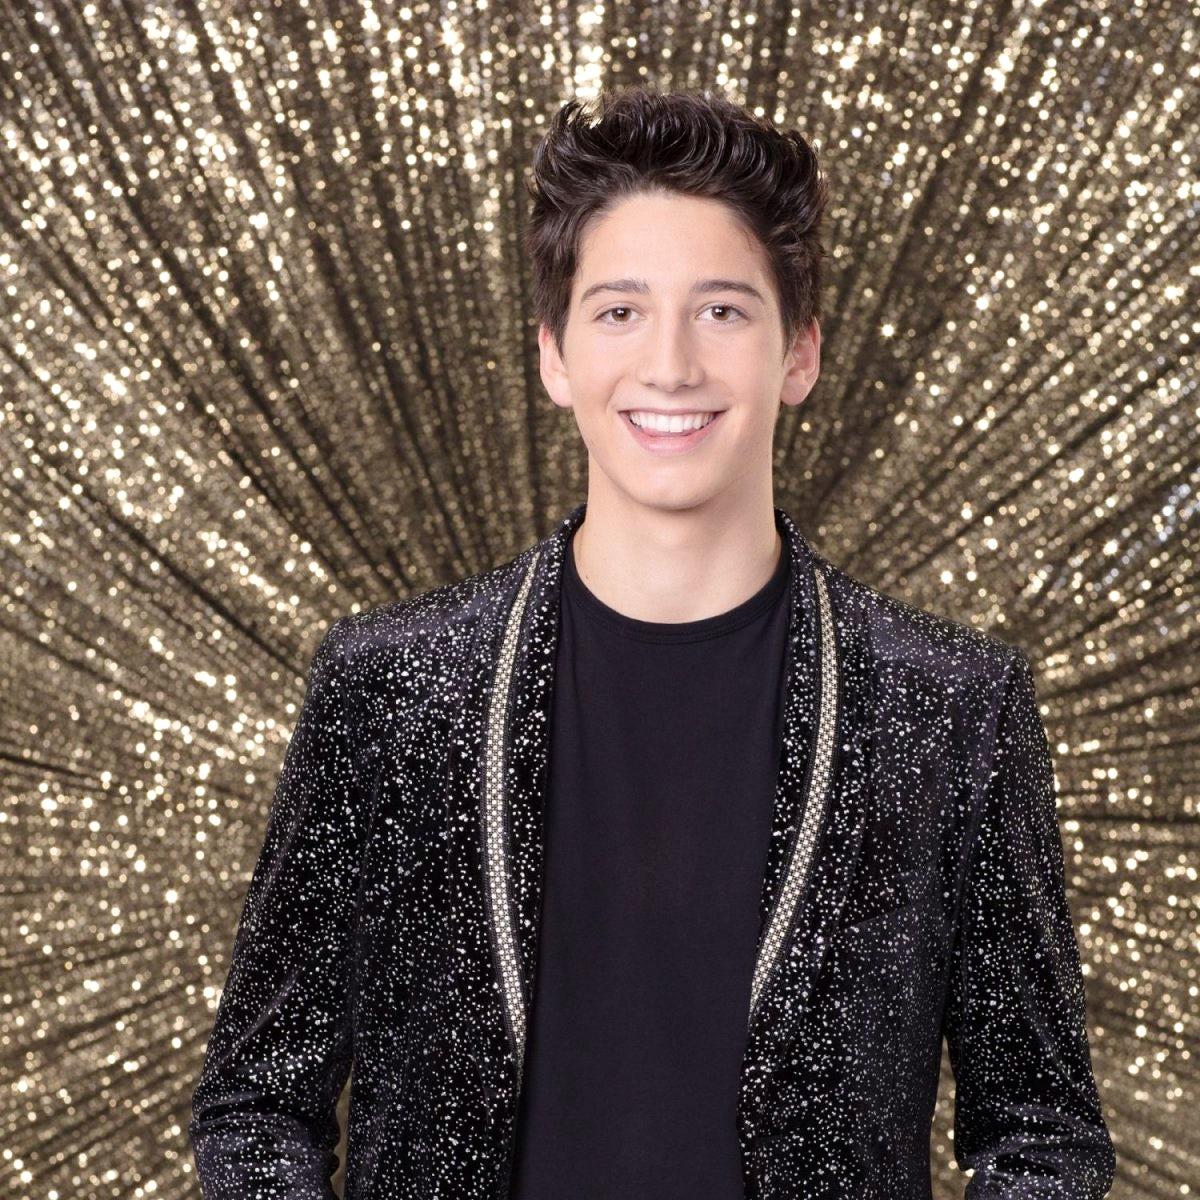 Milo Manheim - 5 things to know about the 'Dancing with the Stars